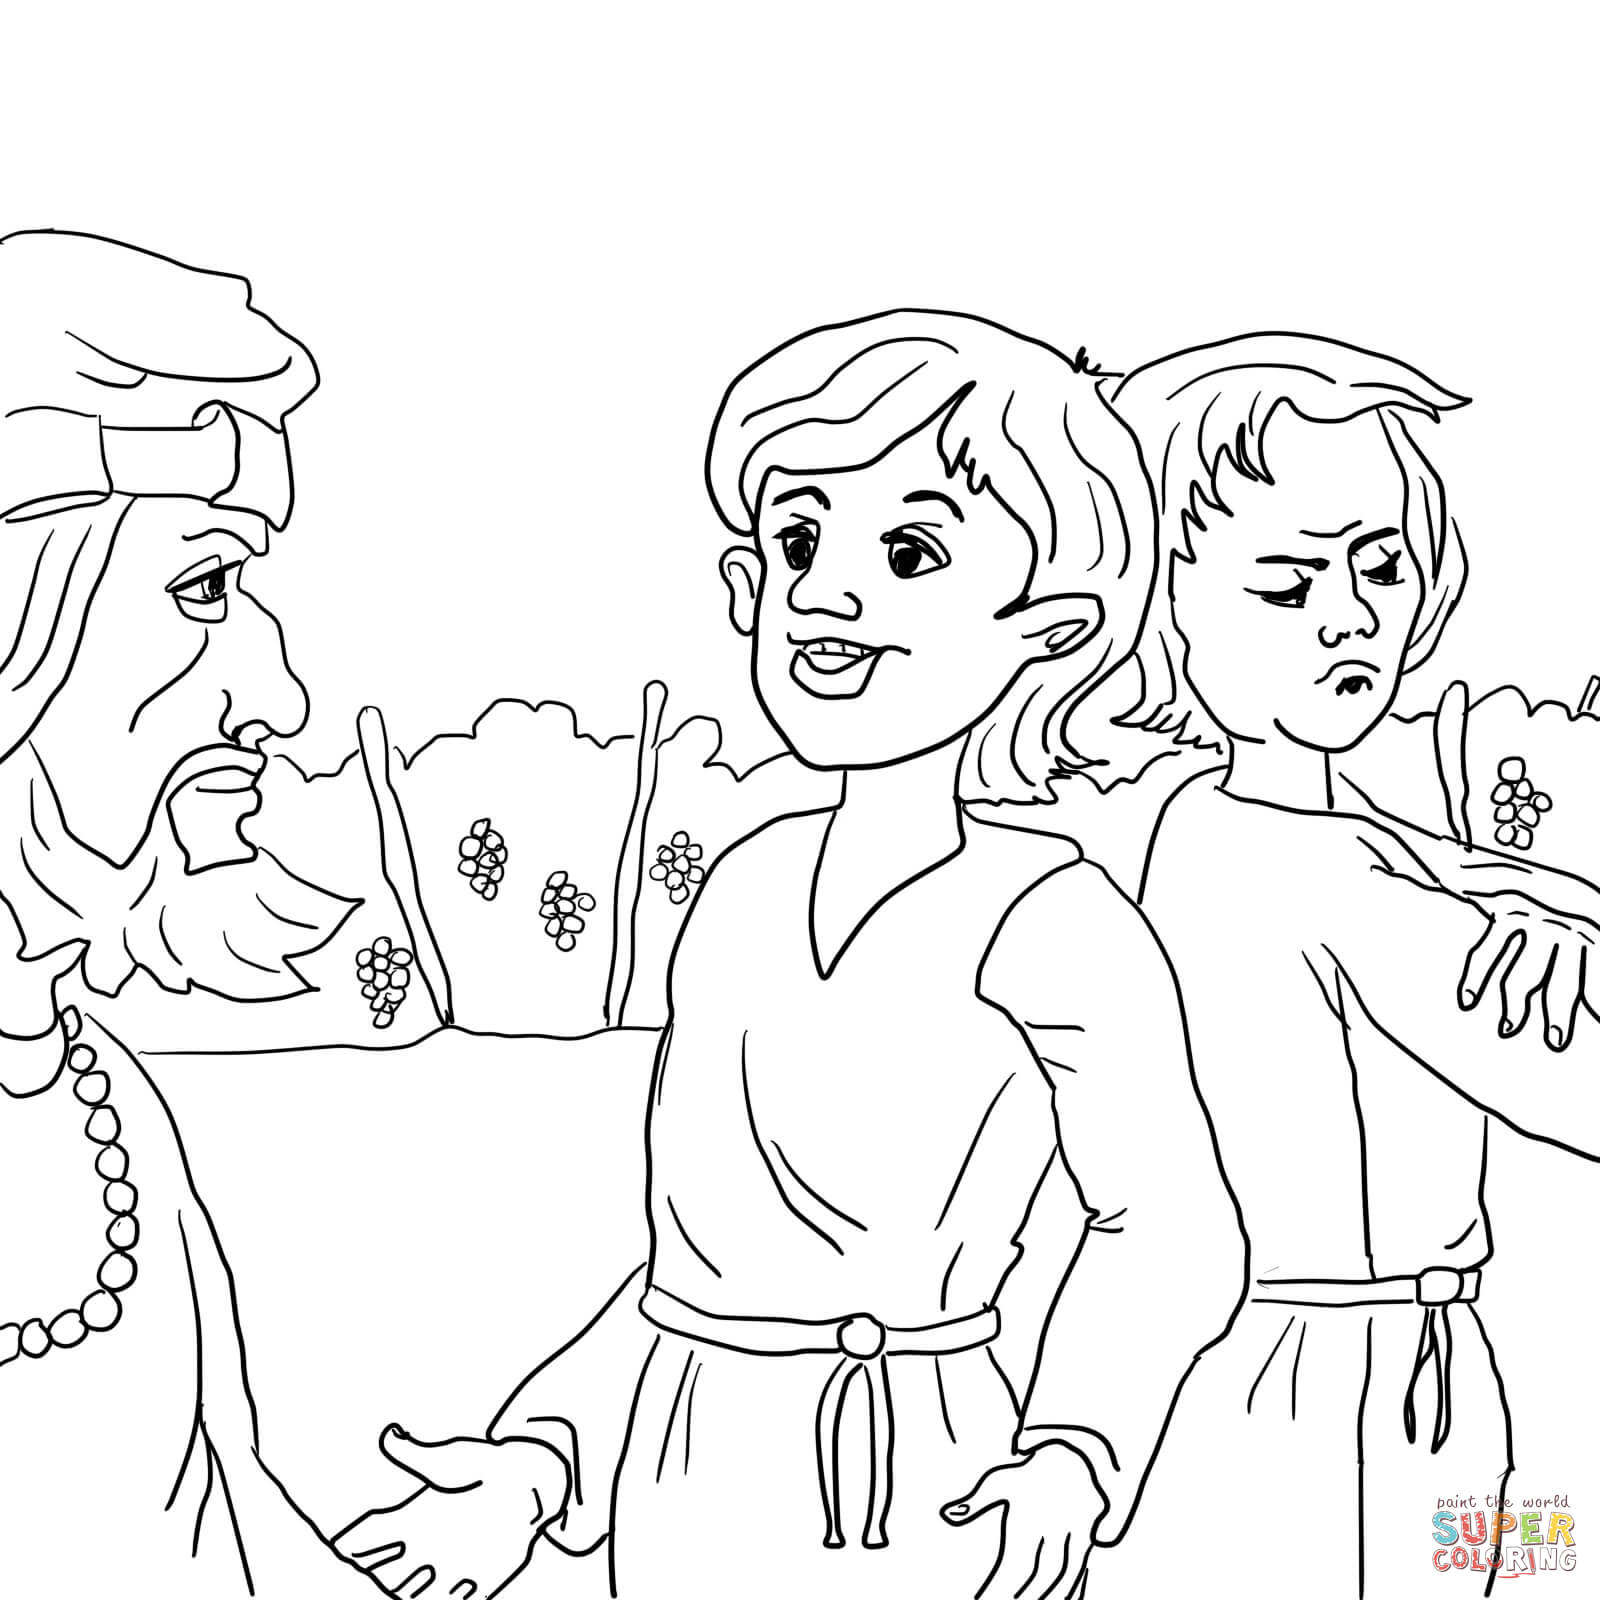 Parable of the two sons coloring page free printable coloring pages